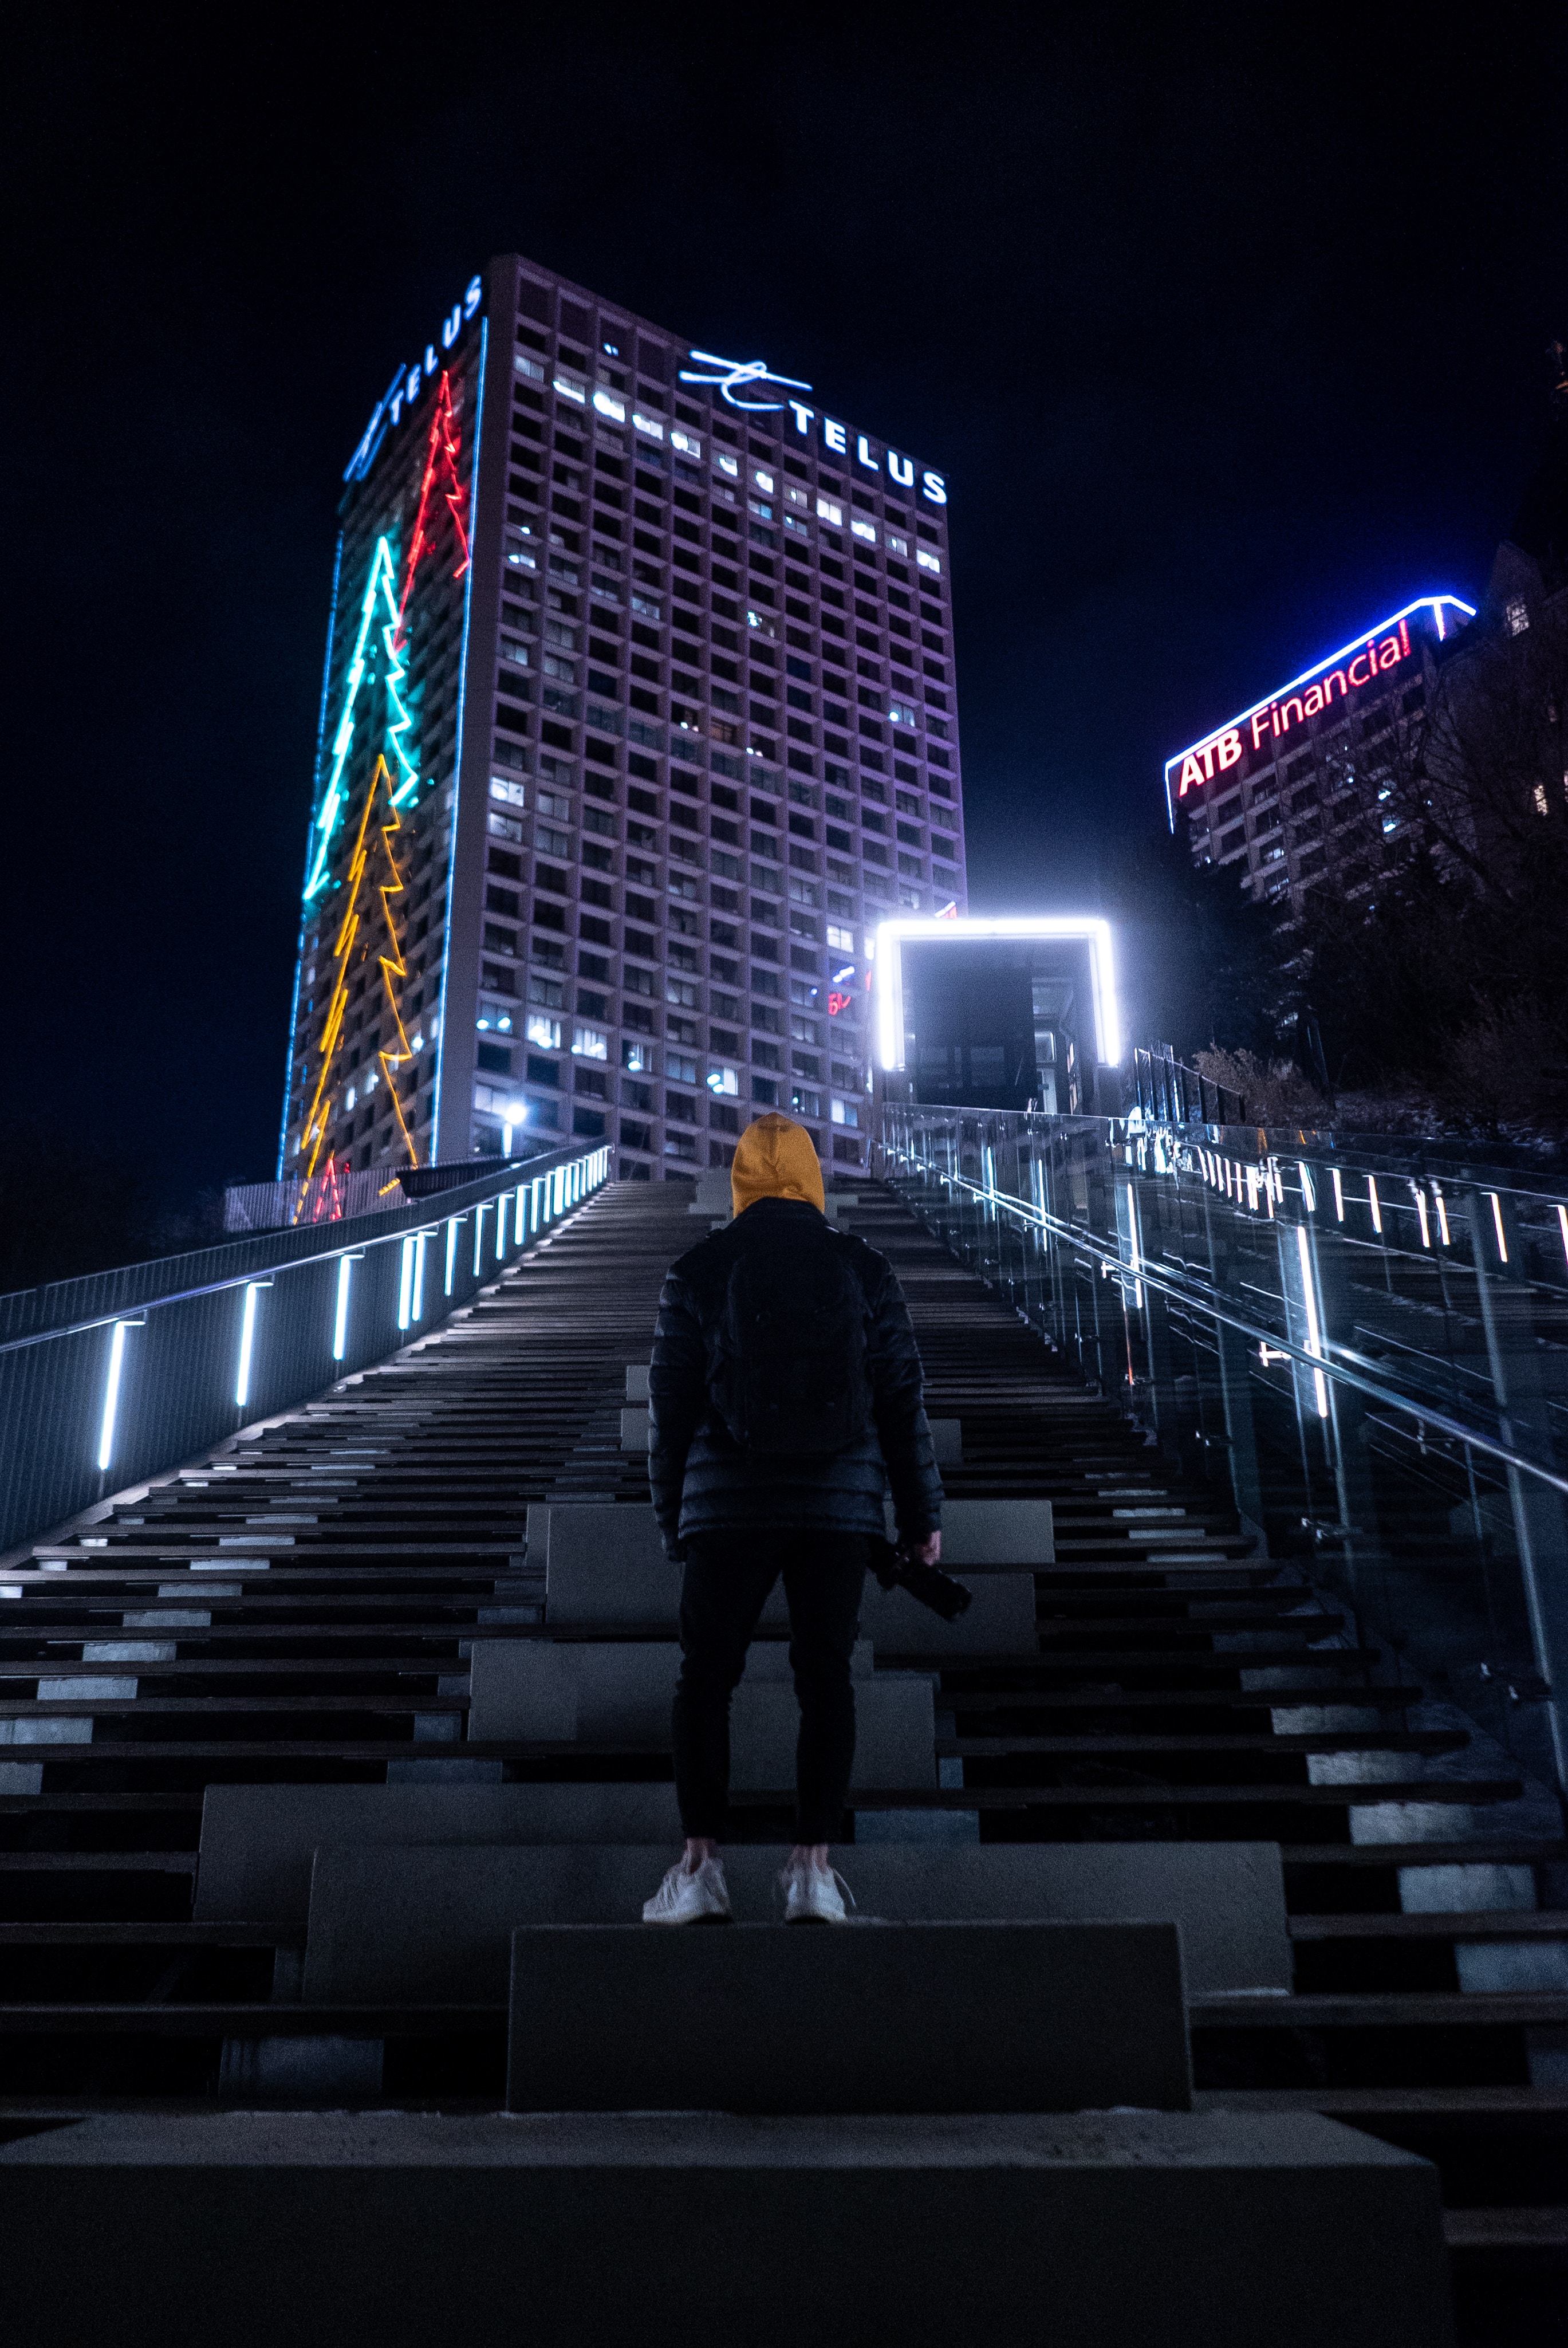 alone, lonely, building, dark, night city, human, person, hood